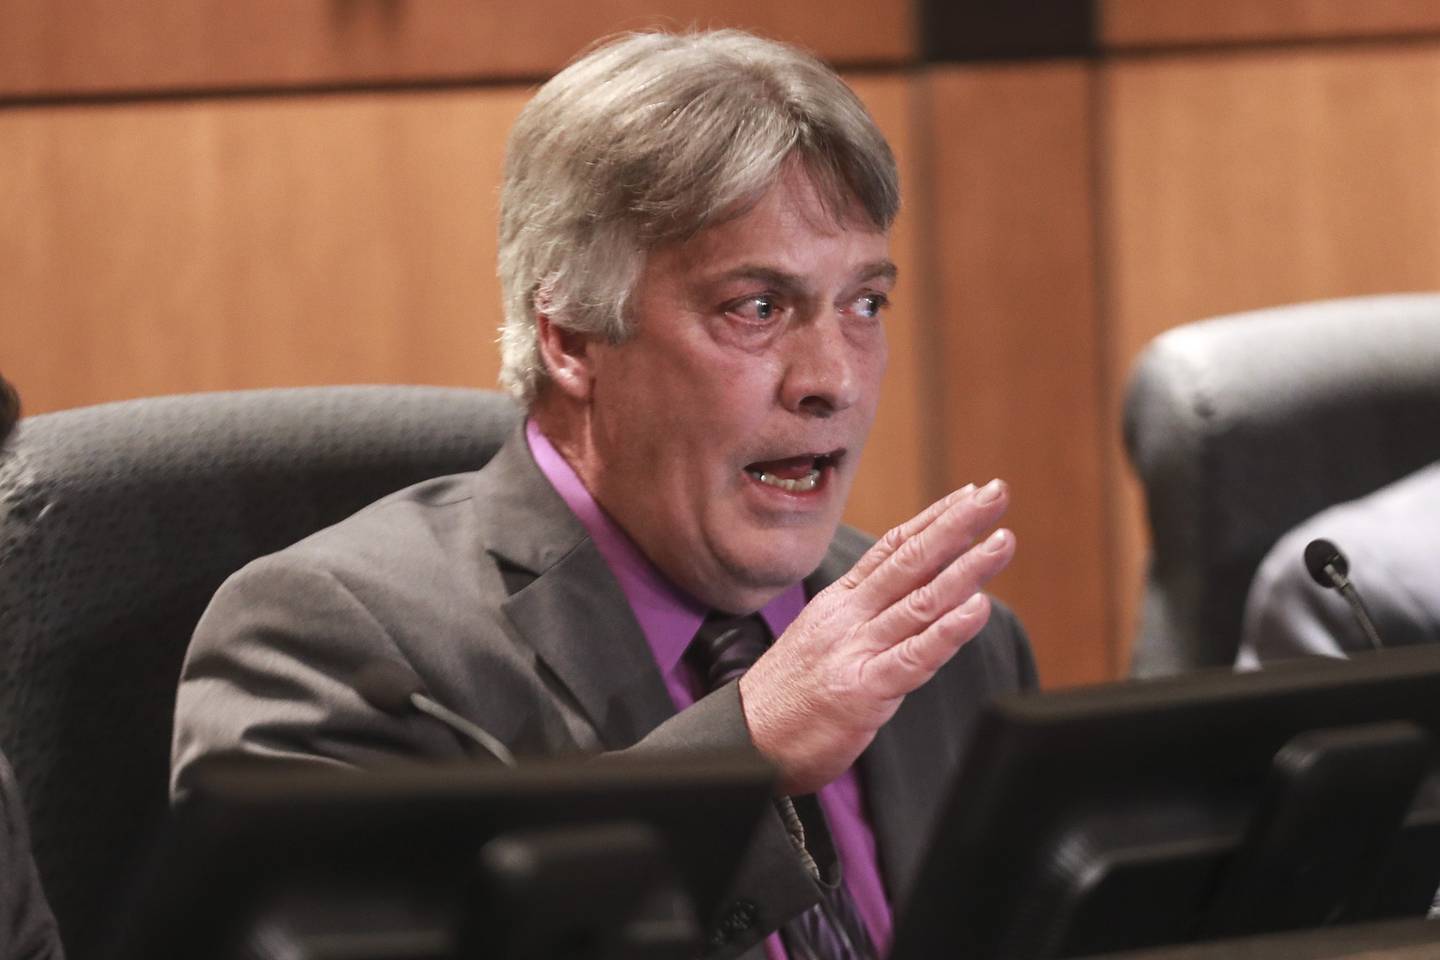 Councilman Larry Hug voices his frustration at tabling a vote on liquor licenses on Tuesday, May 18, 2021, at Joliet City Hall in Joliet, Ill. The Joliet City Council discussed an amendment to allow for liquor consumption and video gambling at gas stations.